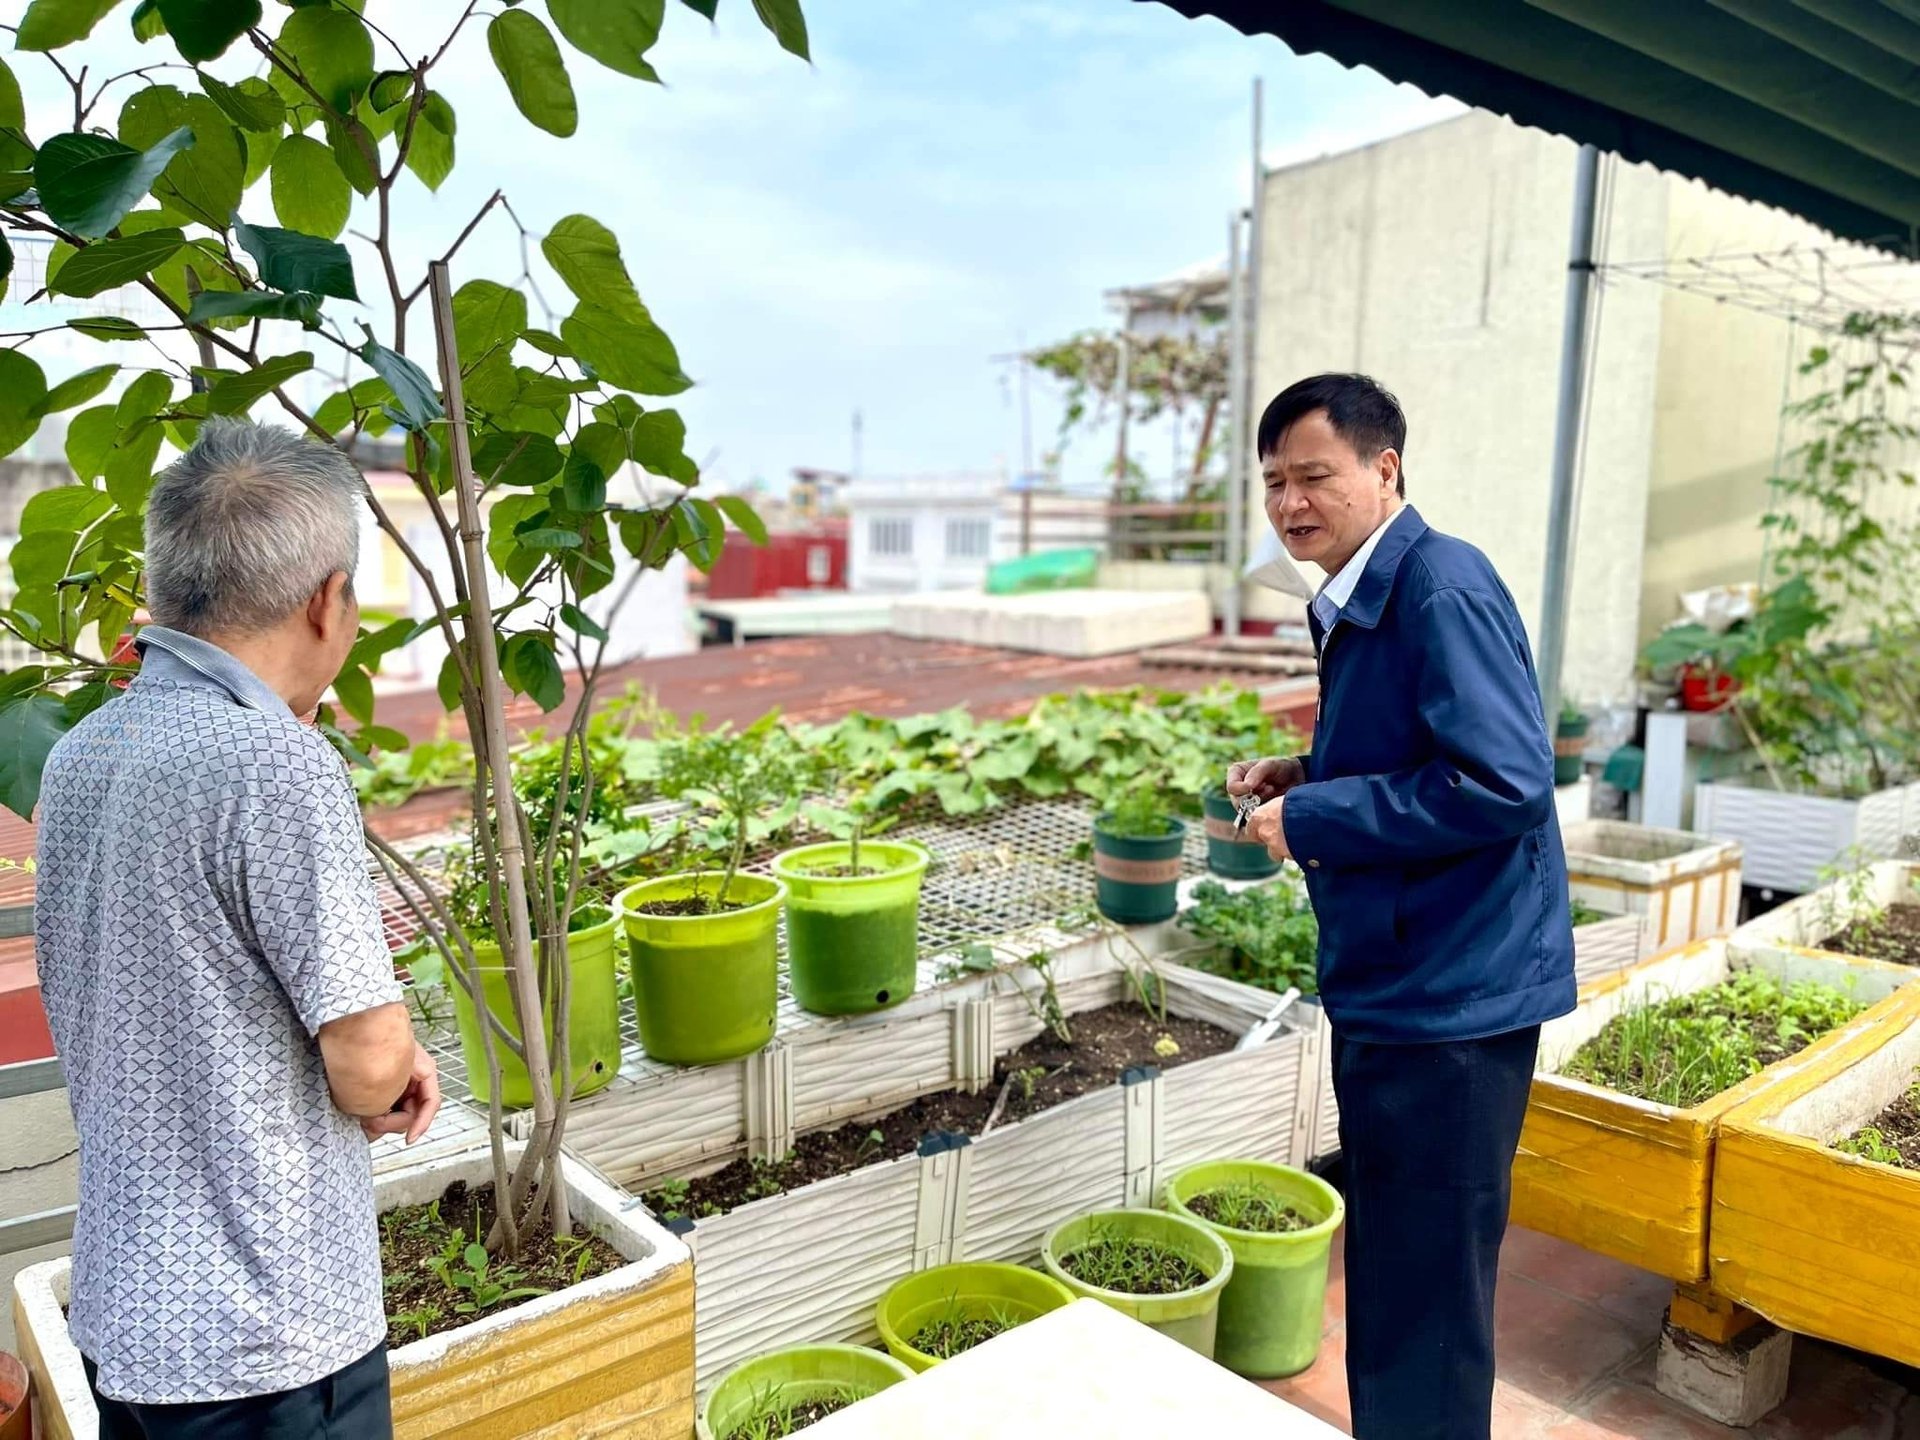 Urban agriculture development in Hai Phong is basically fragmented and has not been carried out methodically due to the large potential for peri-urban agricultural development. Photo: Van Nguyen.